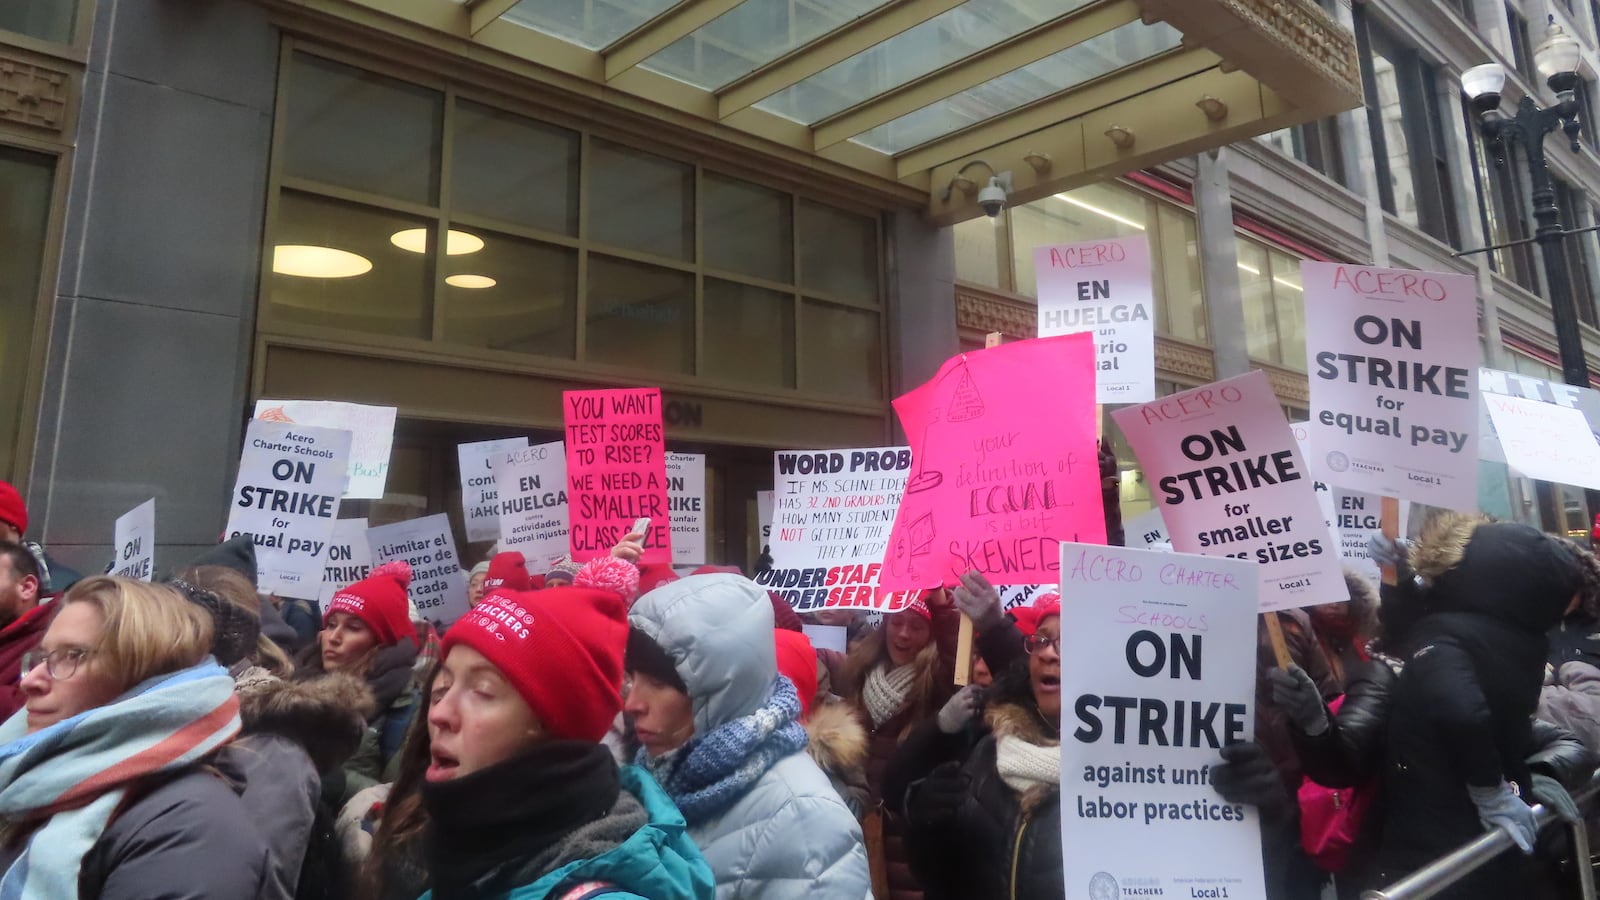 Teachers picket in front of Chicago Public Schools headquarters on the second day of the Acero teachers strike.